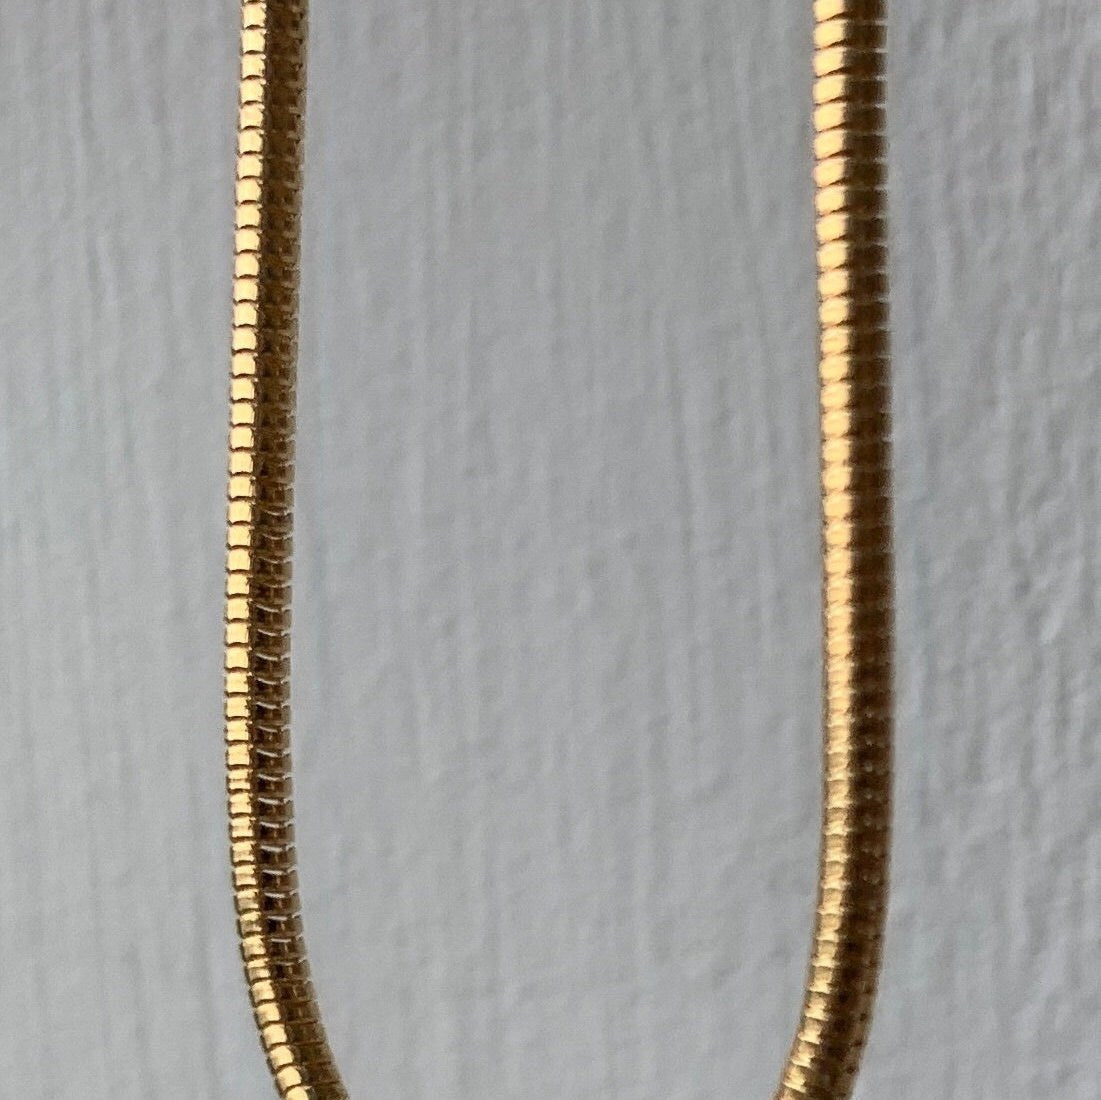 Gold Plated chain 18 inch Gold Snake Chain Budget Gold Colored Chain Necklace Inexpensive Thick Gold Chain, Gold Snake Chain Gold Necklace